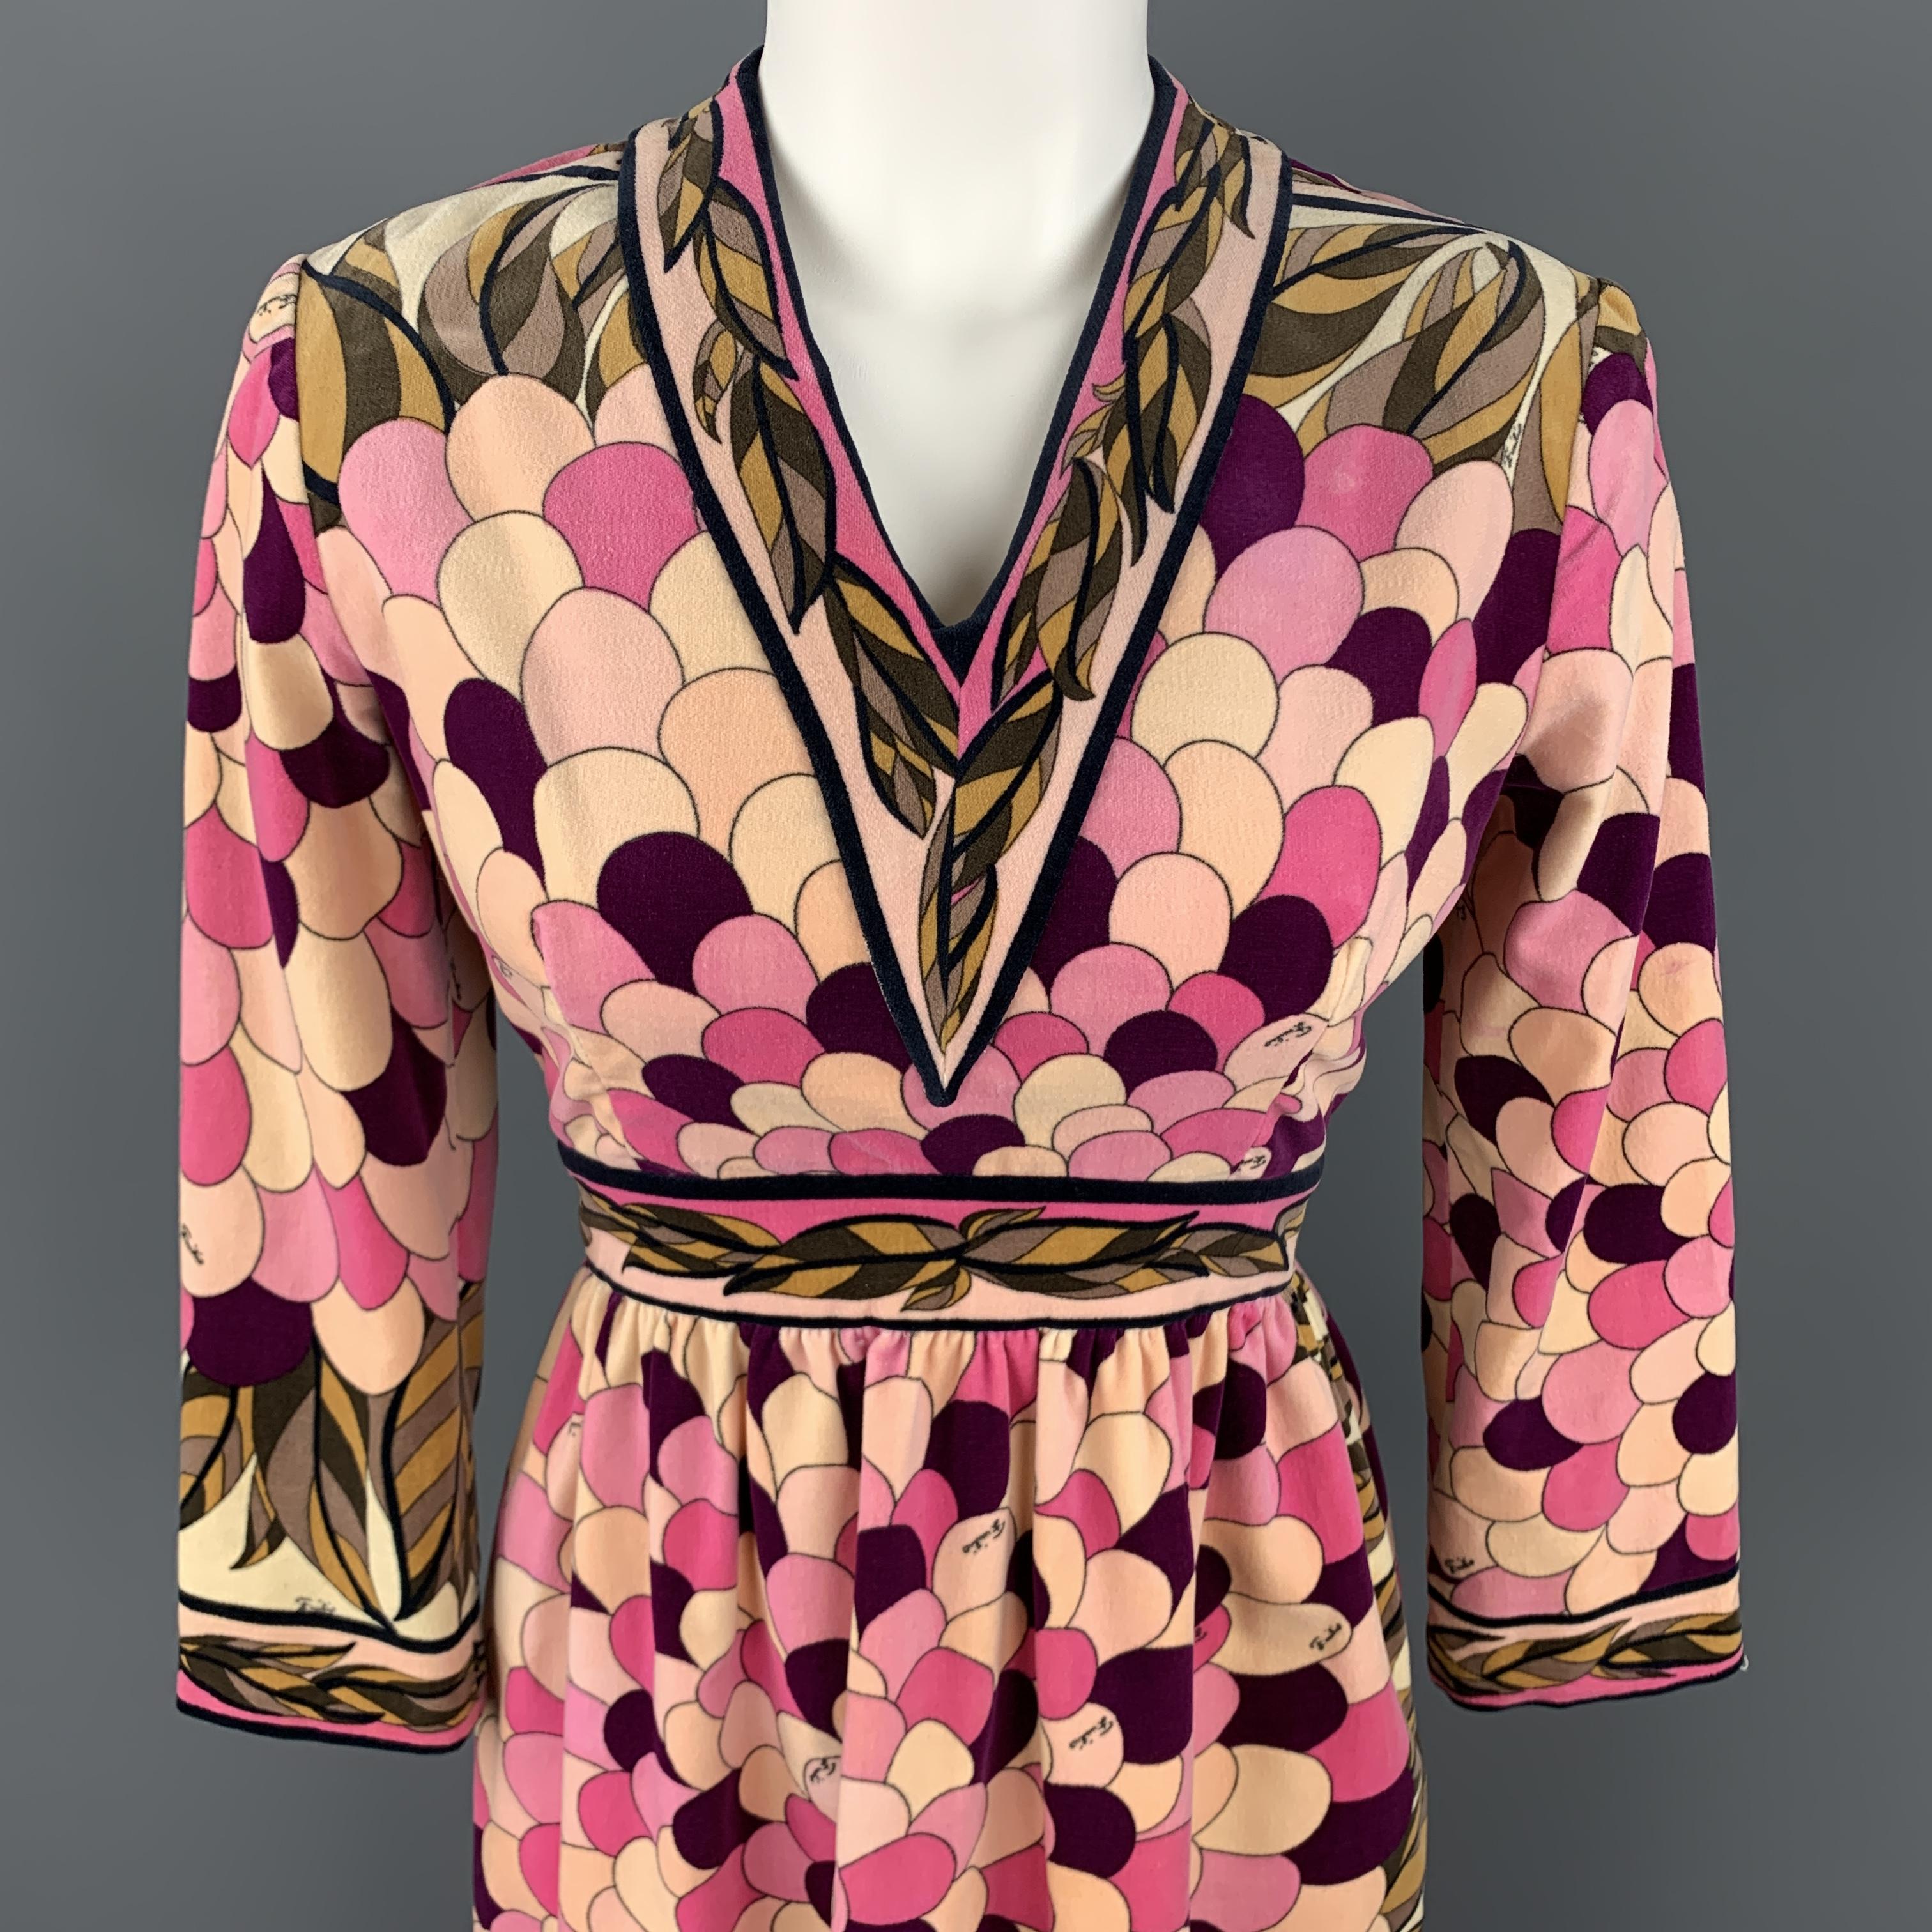 Vintage EMILIO PUCCI dress comes in light pink velvet with an all over purple and brown print, v neck, cropped long sleeve, and A ling skirt. Made in Italy.

Good Pre-Owned Condition.
Marked: 10

Measurements:

Shoulder: 16 in.
Bust: 36 in.
Waist: